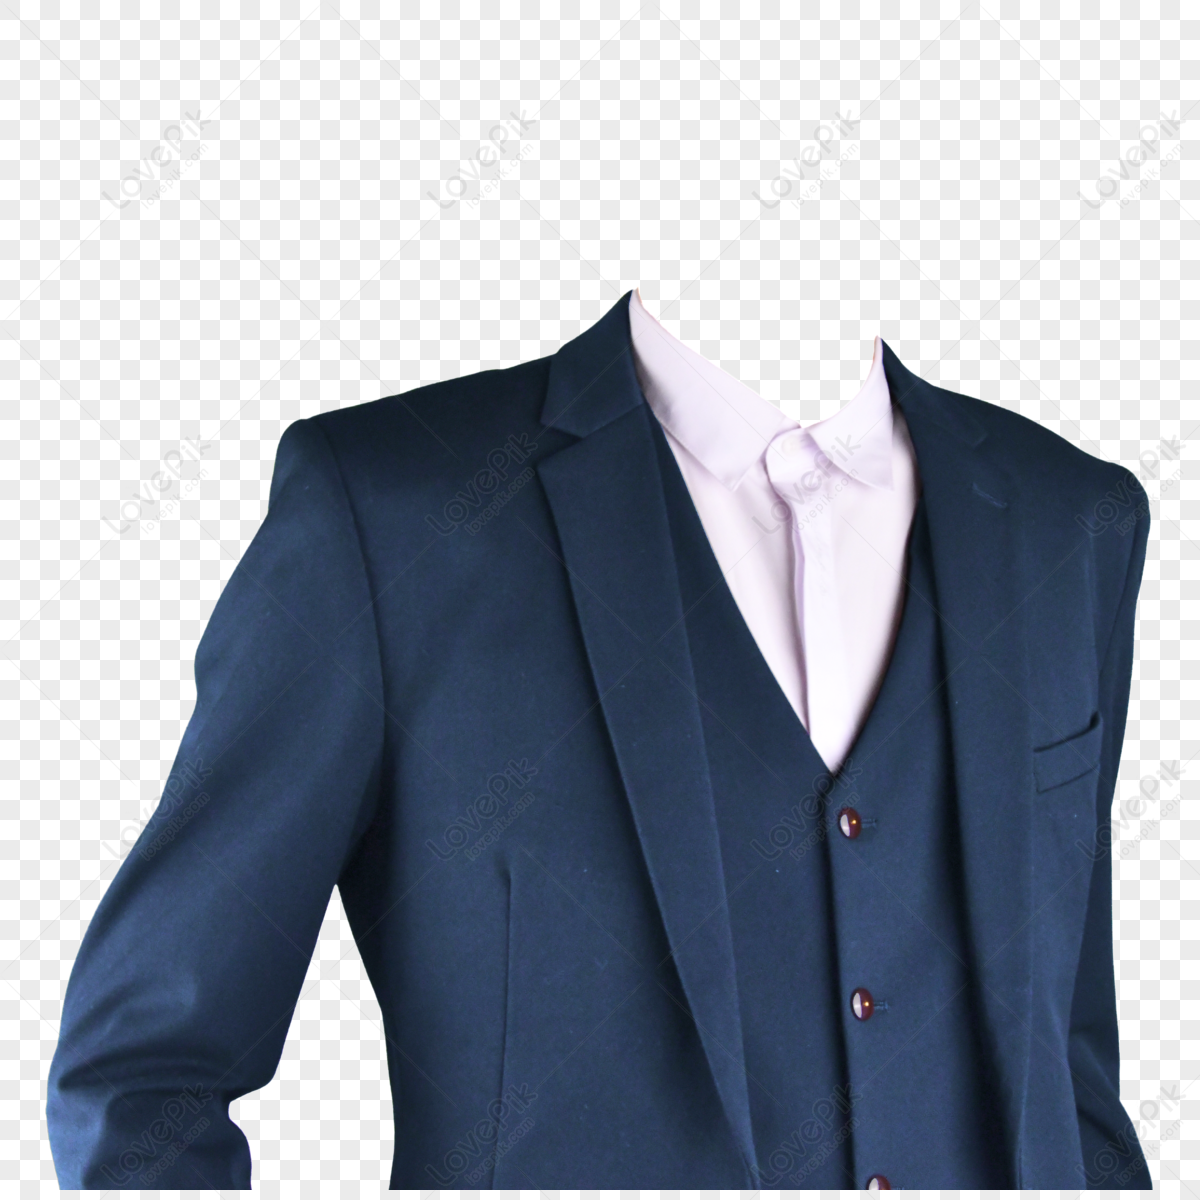 Formal Suits White Transparent, Formal Gray Color Suit Png, Formal Suit,  Gray Suit, Men Suit PNG Image For Free Download